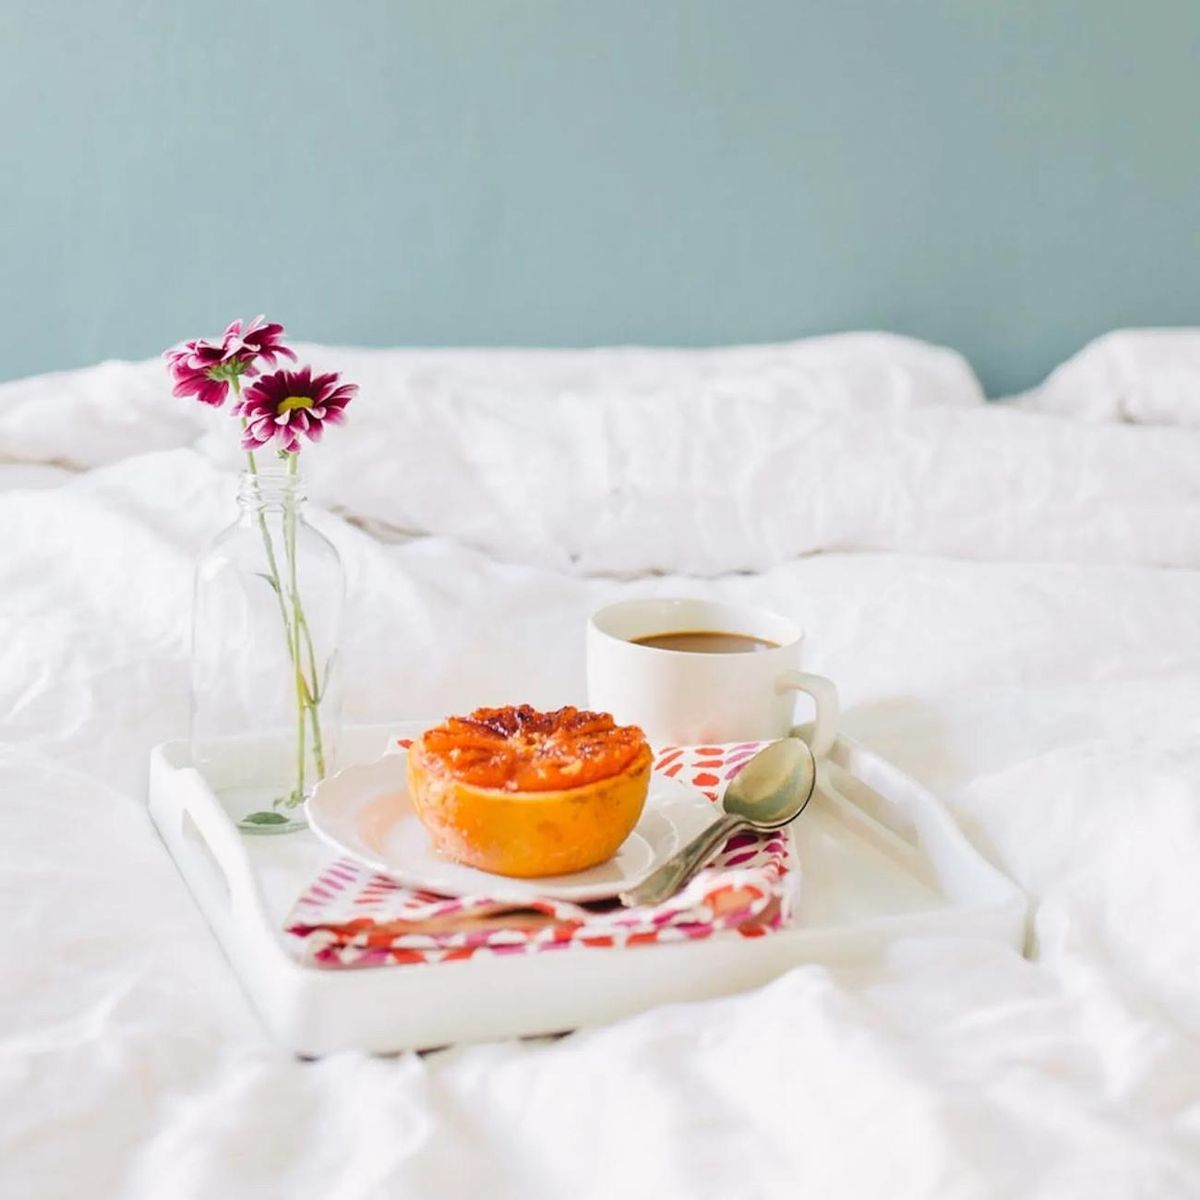 breakfast in bed recipes for valentine's day 2023